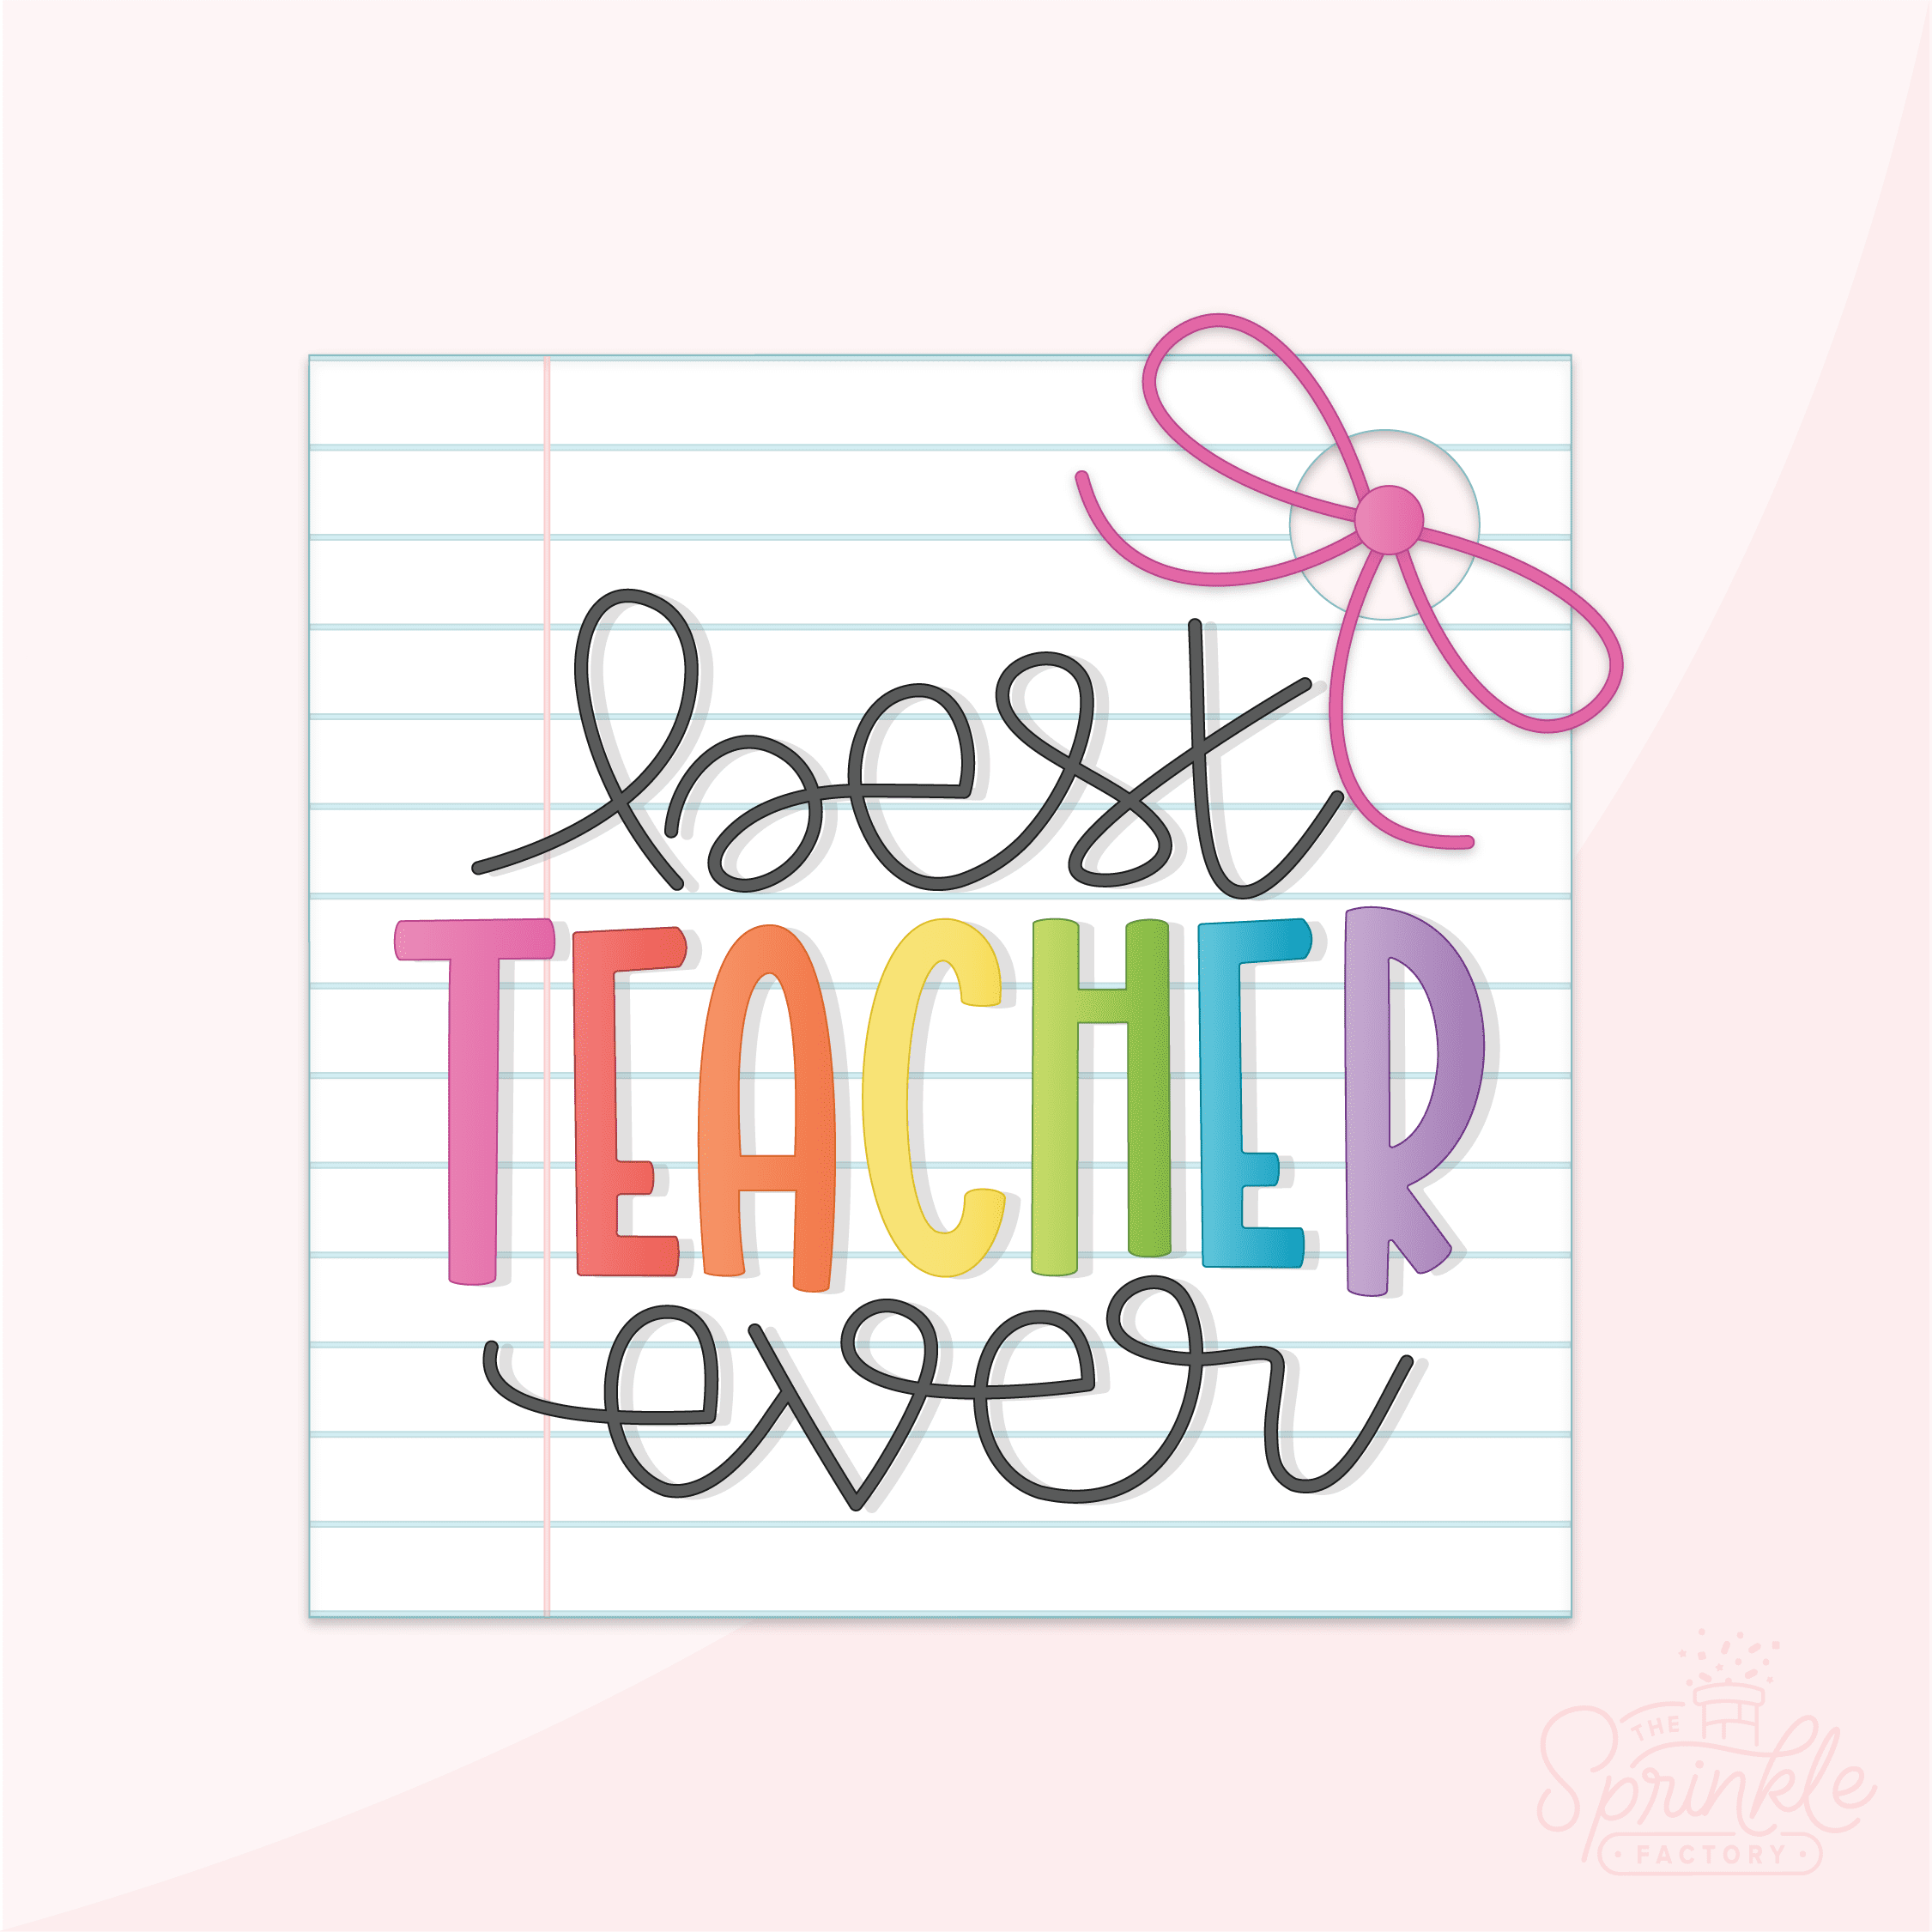 Digital image of a paper tag that says best teacher ever on notebook paper with a pink bow.